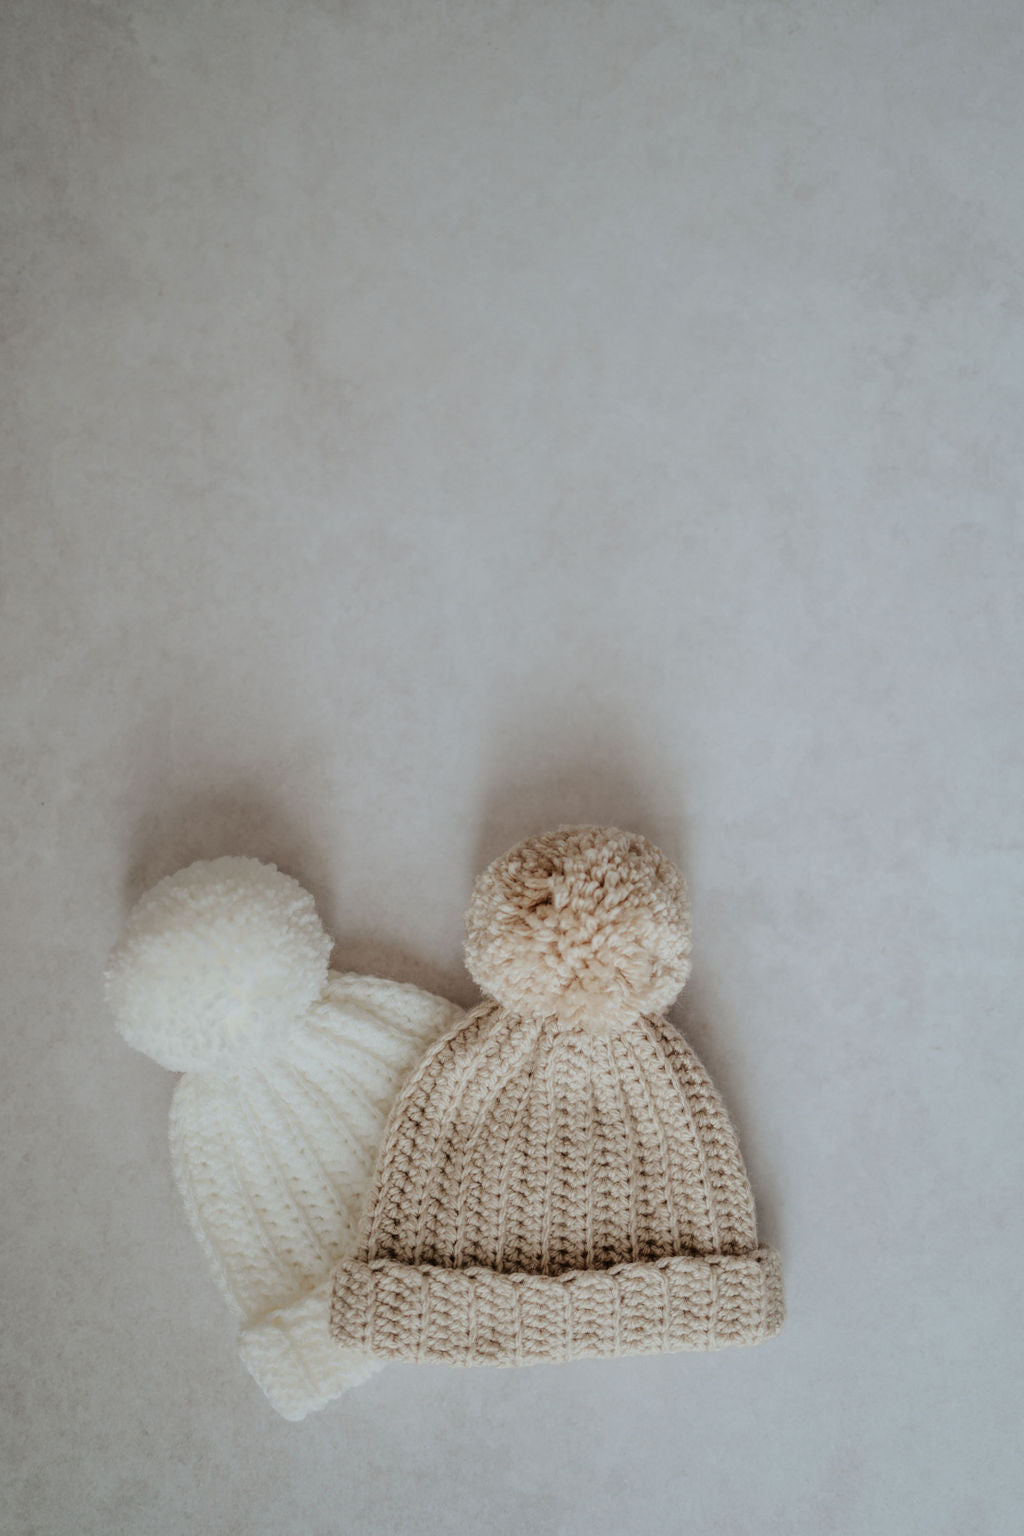 Knitted Beanies